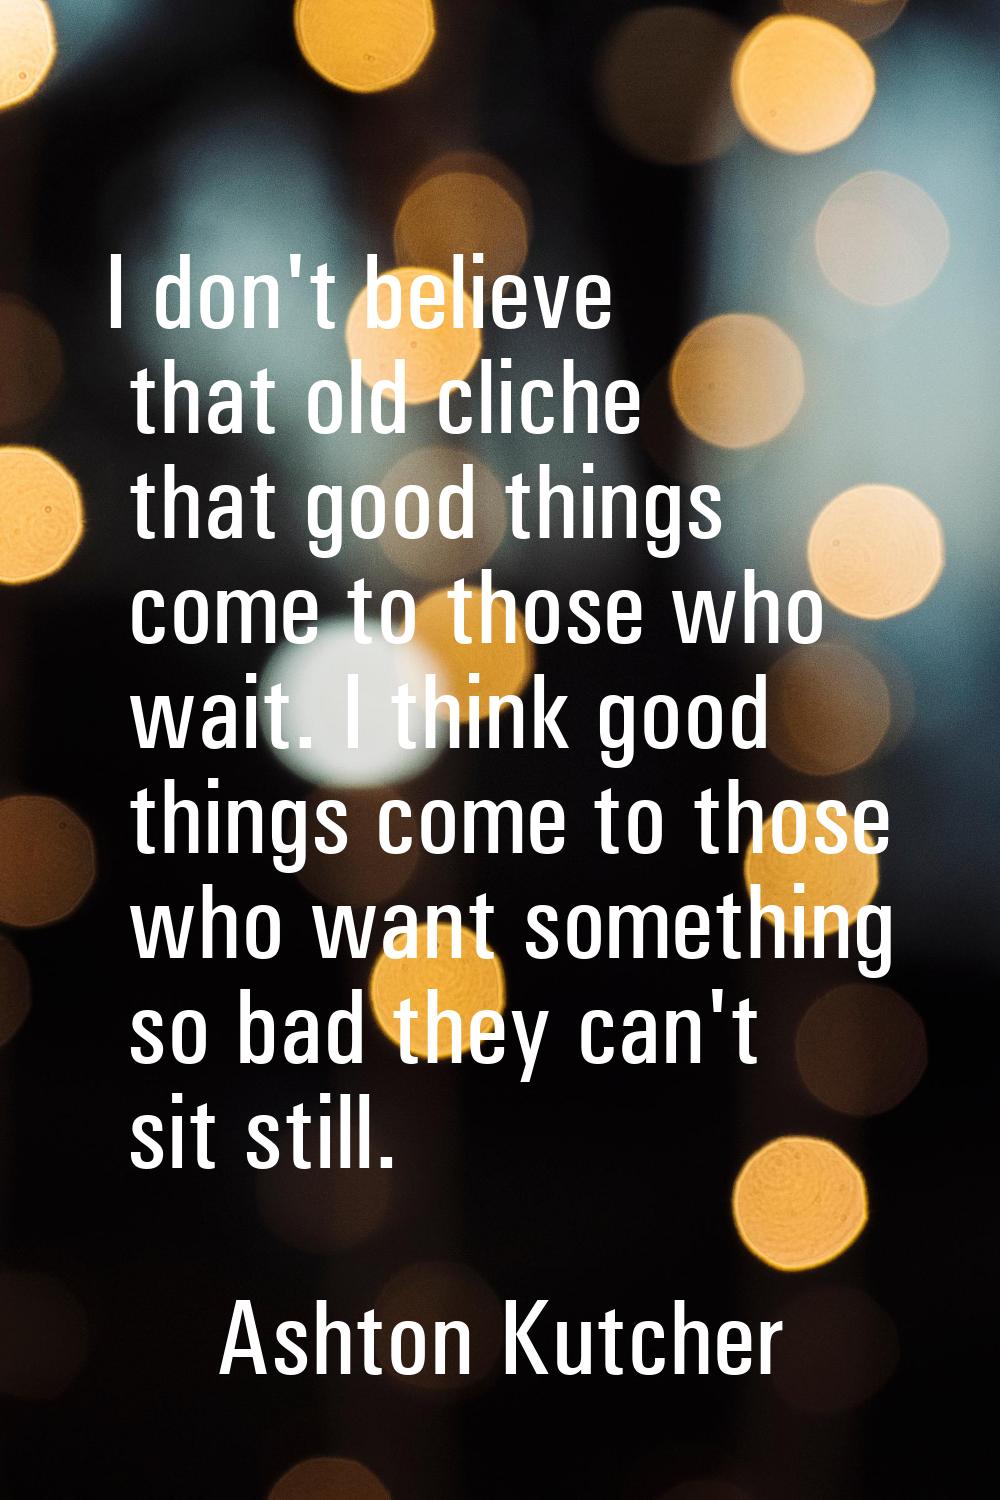 I don't believe that old cliche that good things come to those who wait. I think good things come t